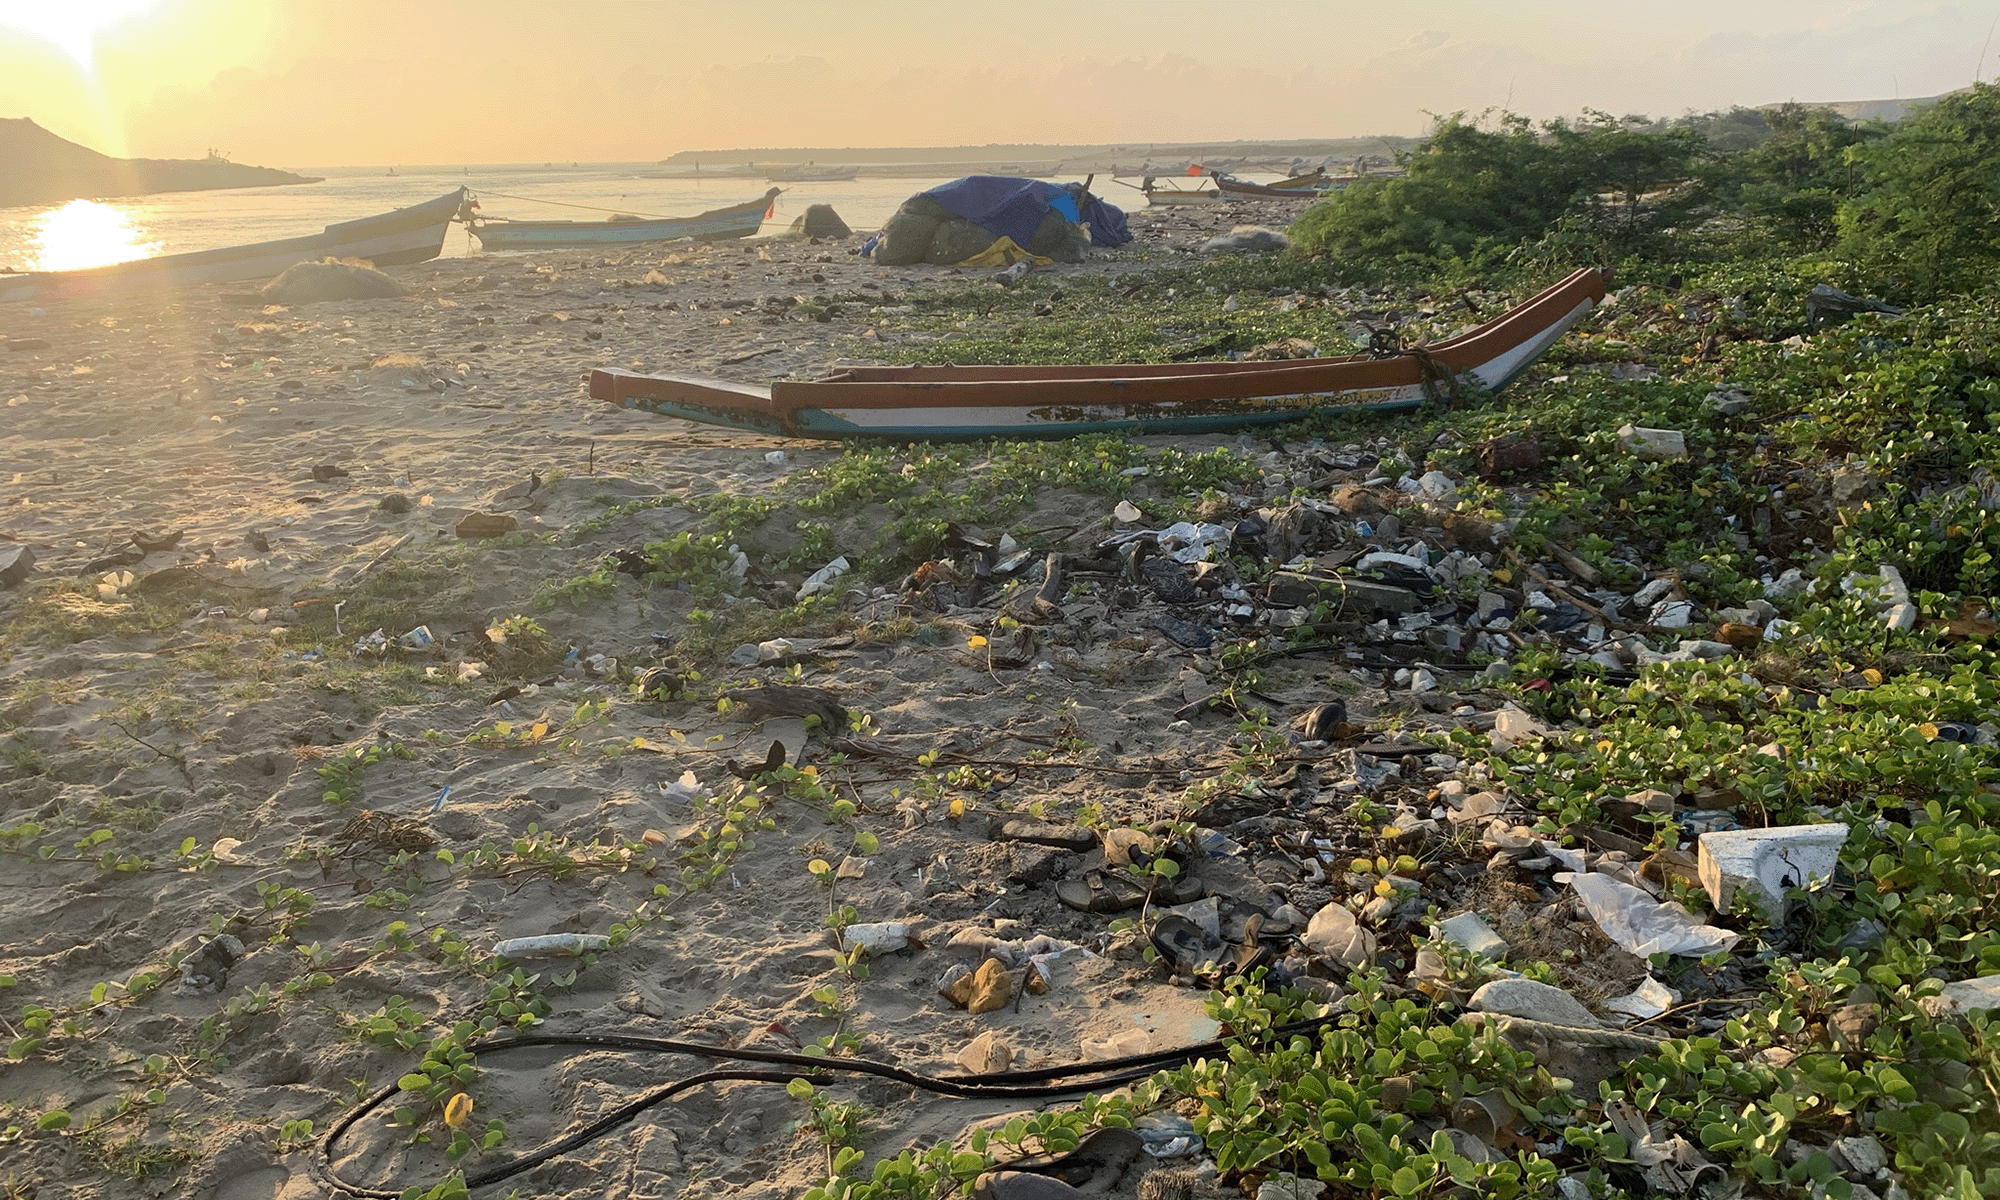 Photo of discarded plastic washed ashore on the beach of Tamil Nadu, India.